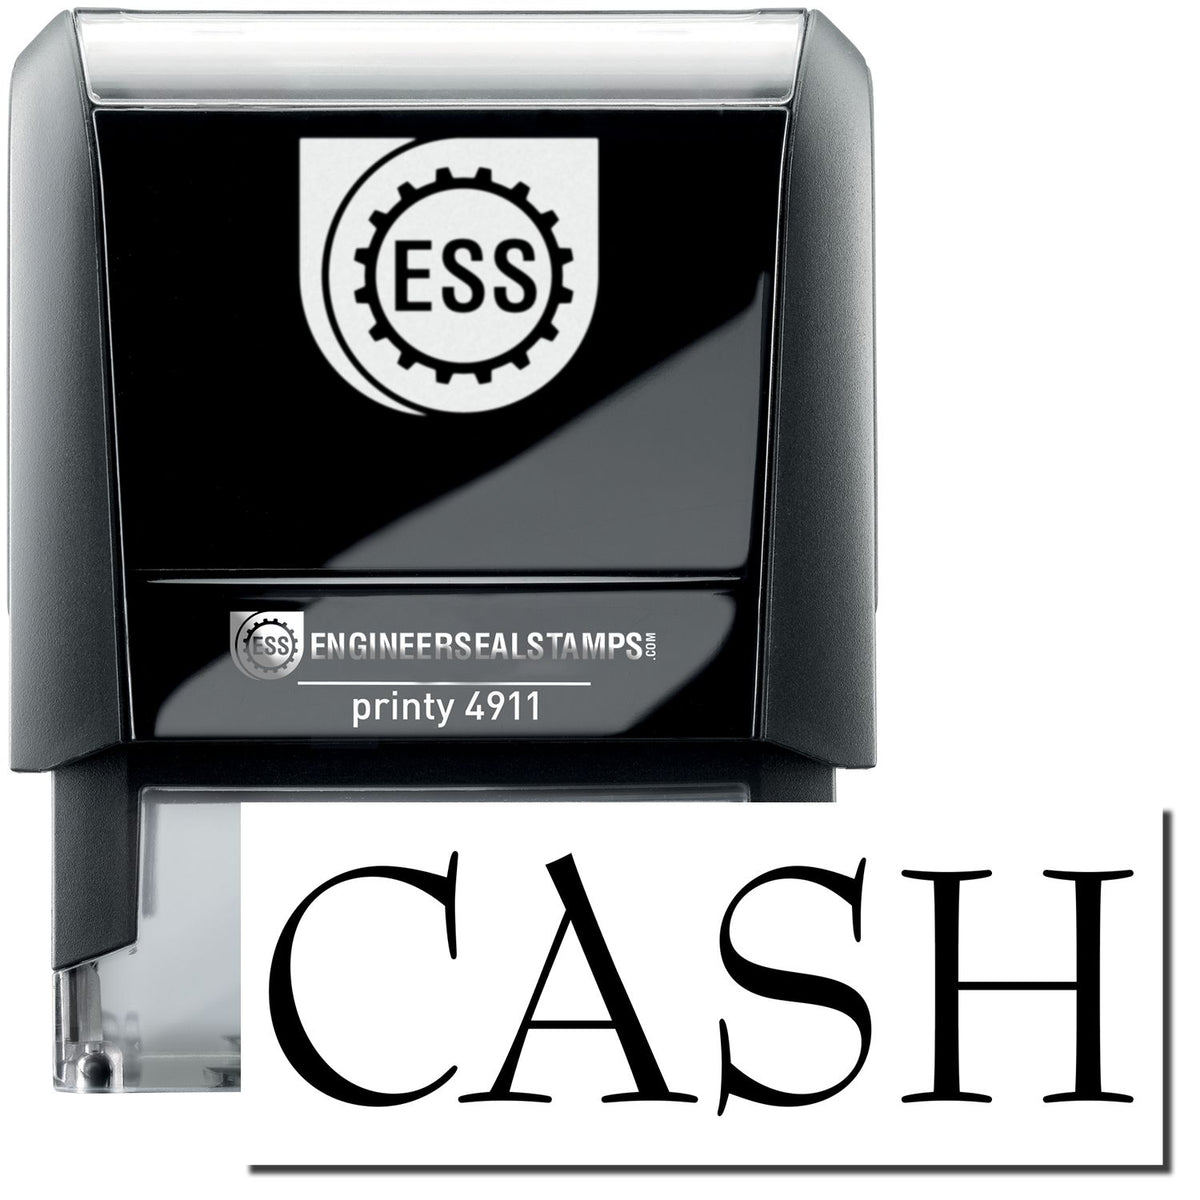 A self-inking stamp with a stamped image showing how the text &quot;CASH&quot; is displayed after stamping.